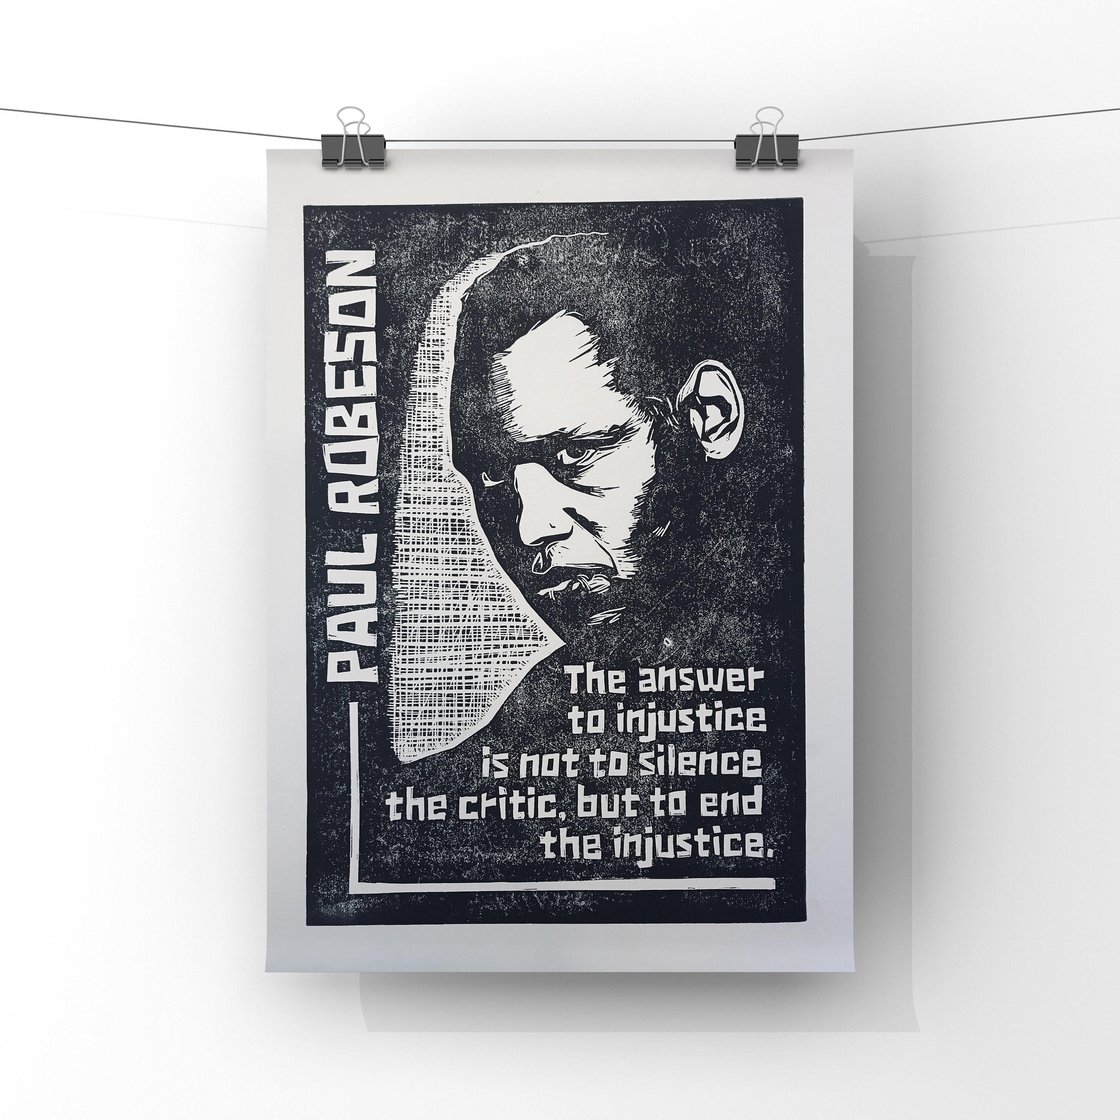 Image of Paul Robeson. Hand Made. Original A4 linocut print. Limited and Signed. Art.